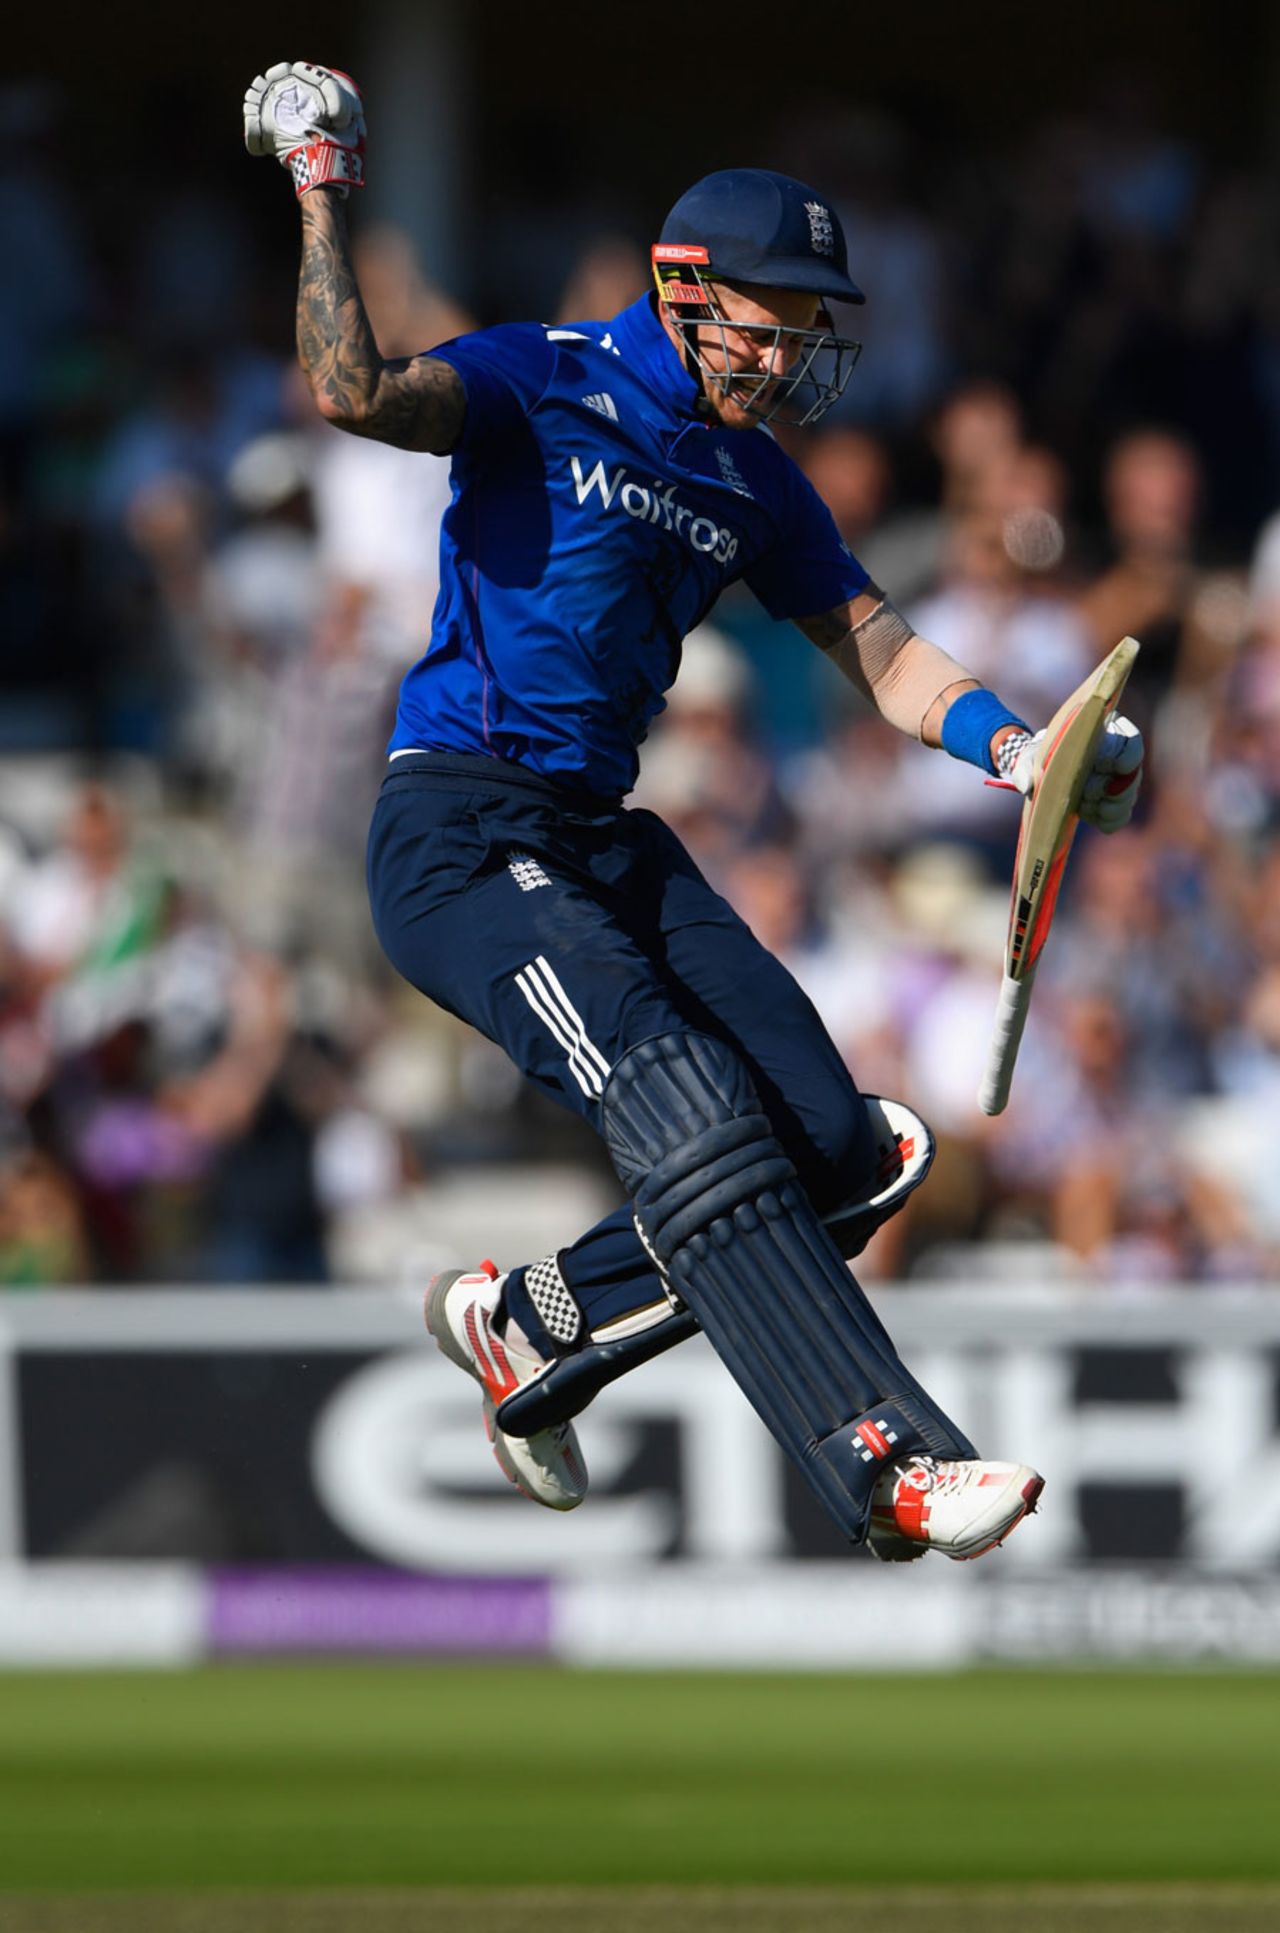 Alex Hales leaps in delight after reaching his fourth ODI ton, England v Pakistan, 3rd ODI, Trent Bridge, August 30, 2016